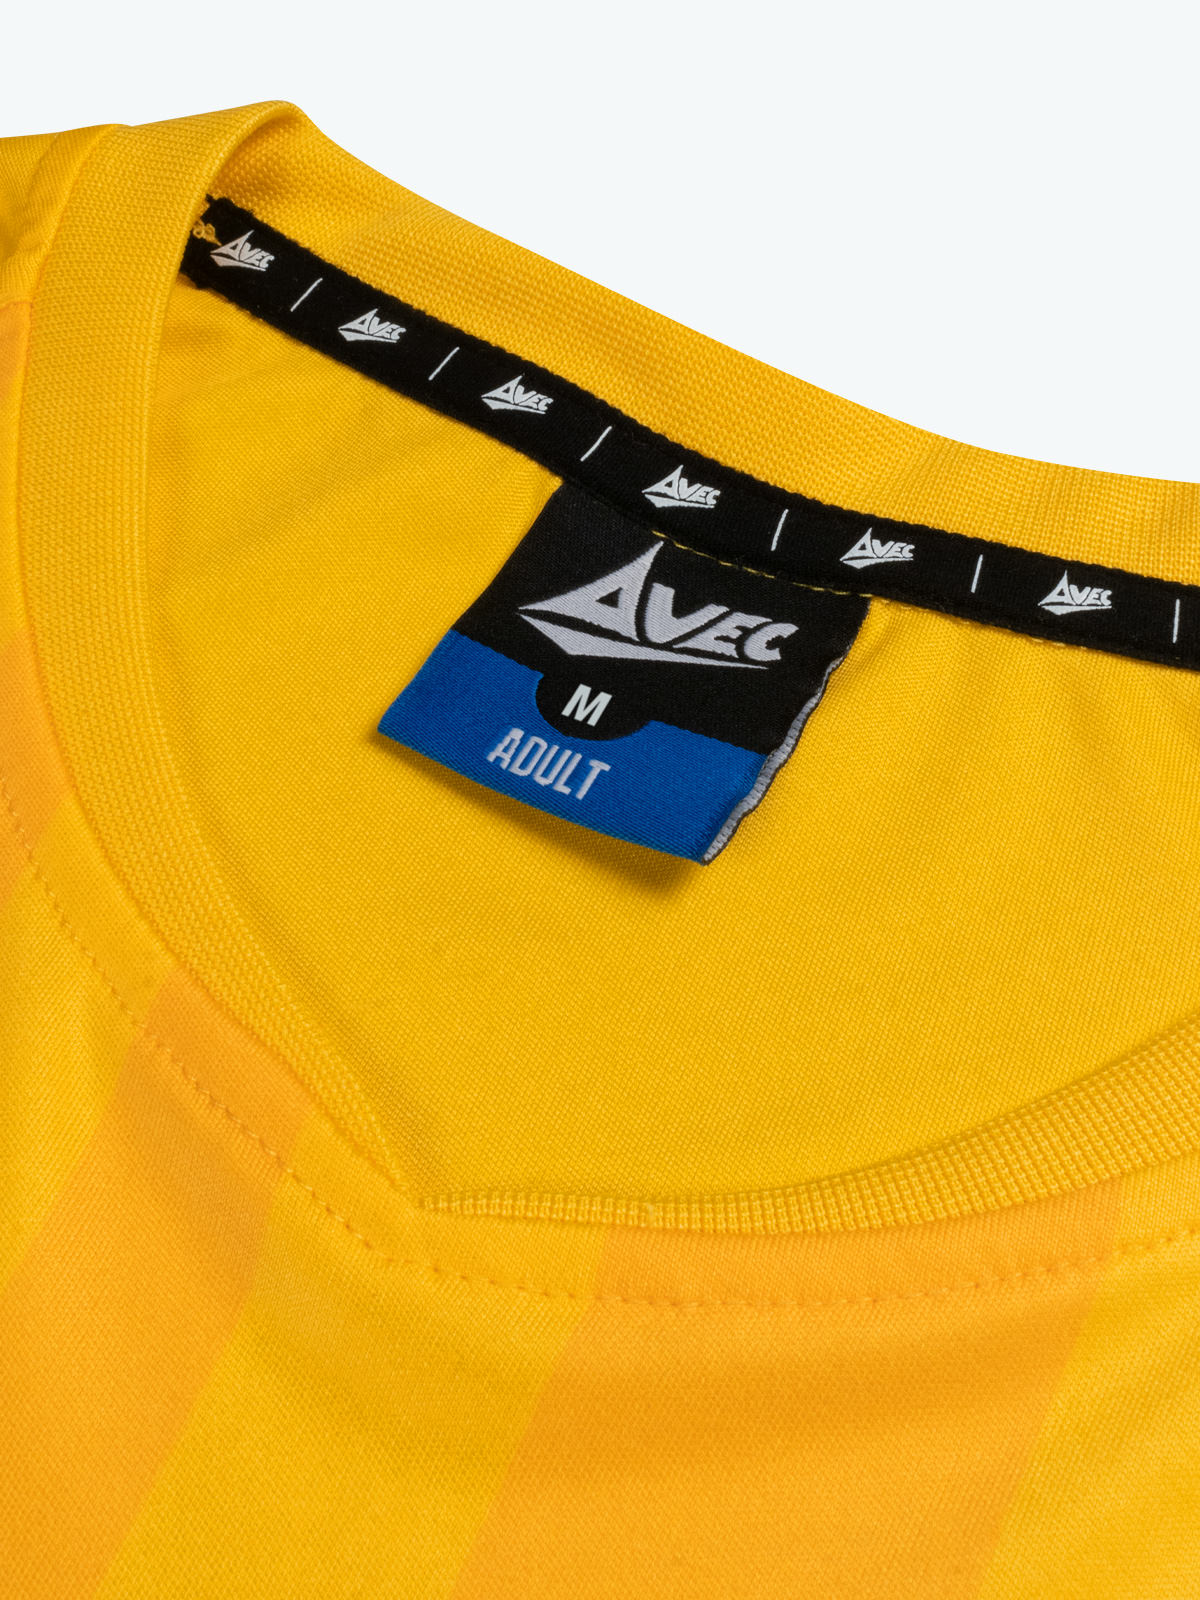 picture of shade jersey - yellow